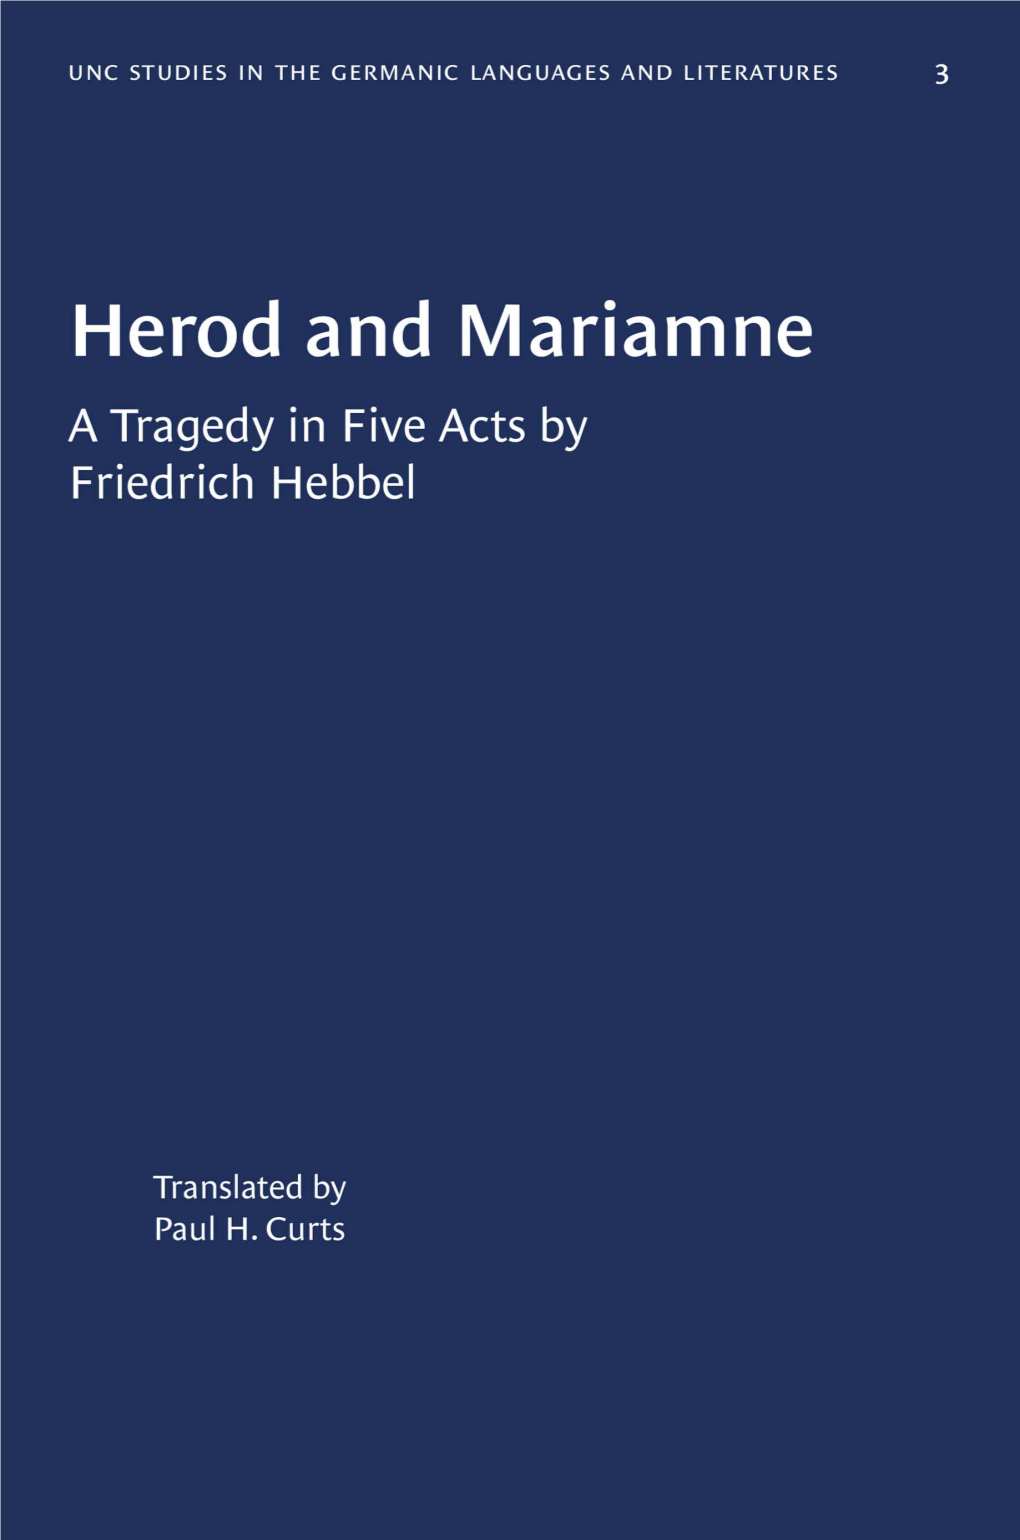 Herod and Mariamne COLLEGE of ARTS and SCIENCES Imunci Germanic and Slavic Languages and Literatures